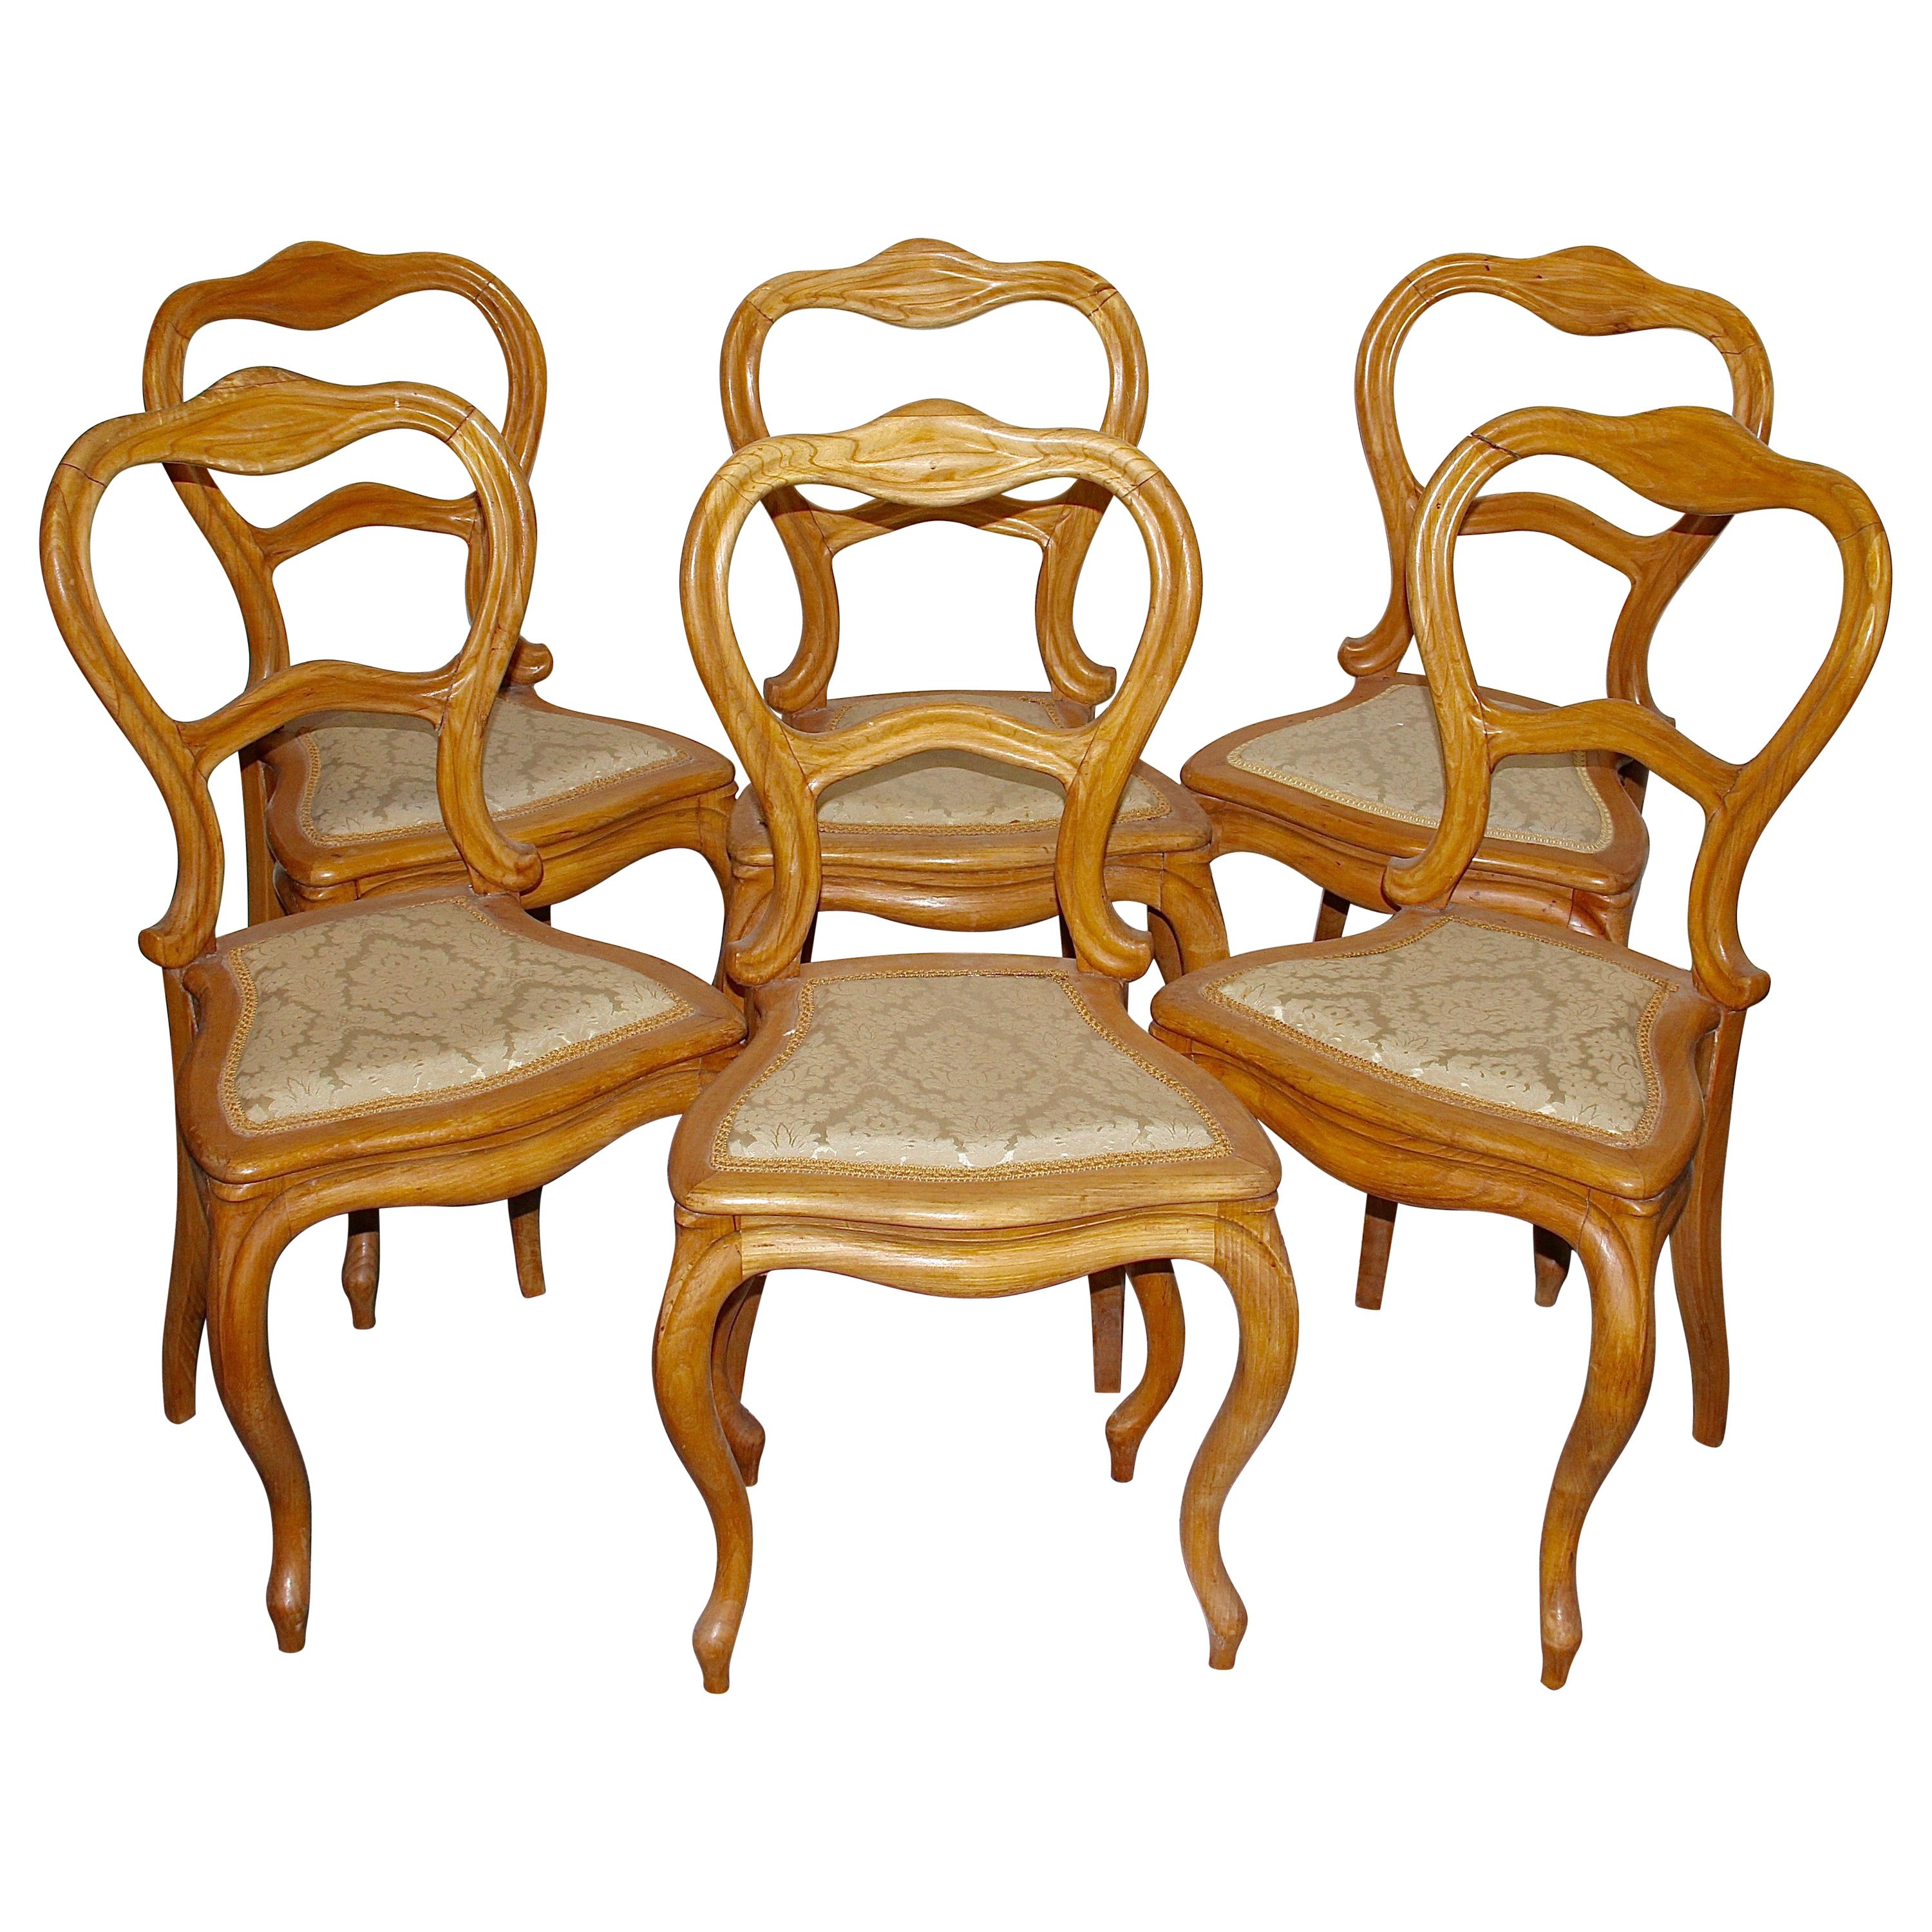 Set of Six Antique Side Chairs, Germany, Early 19th Century